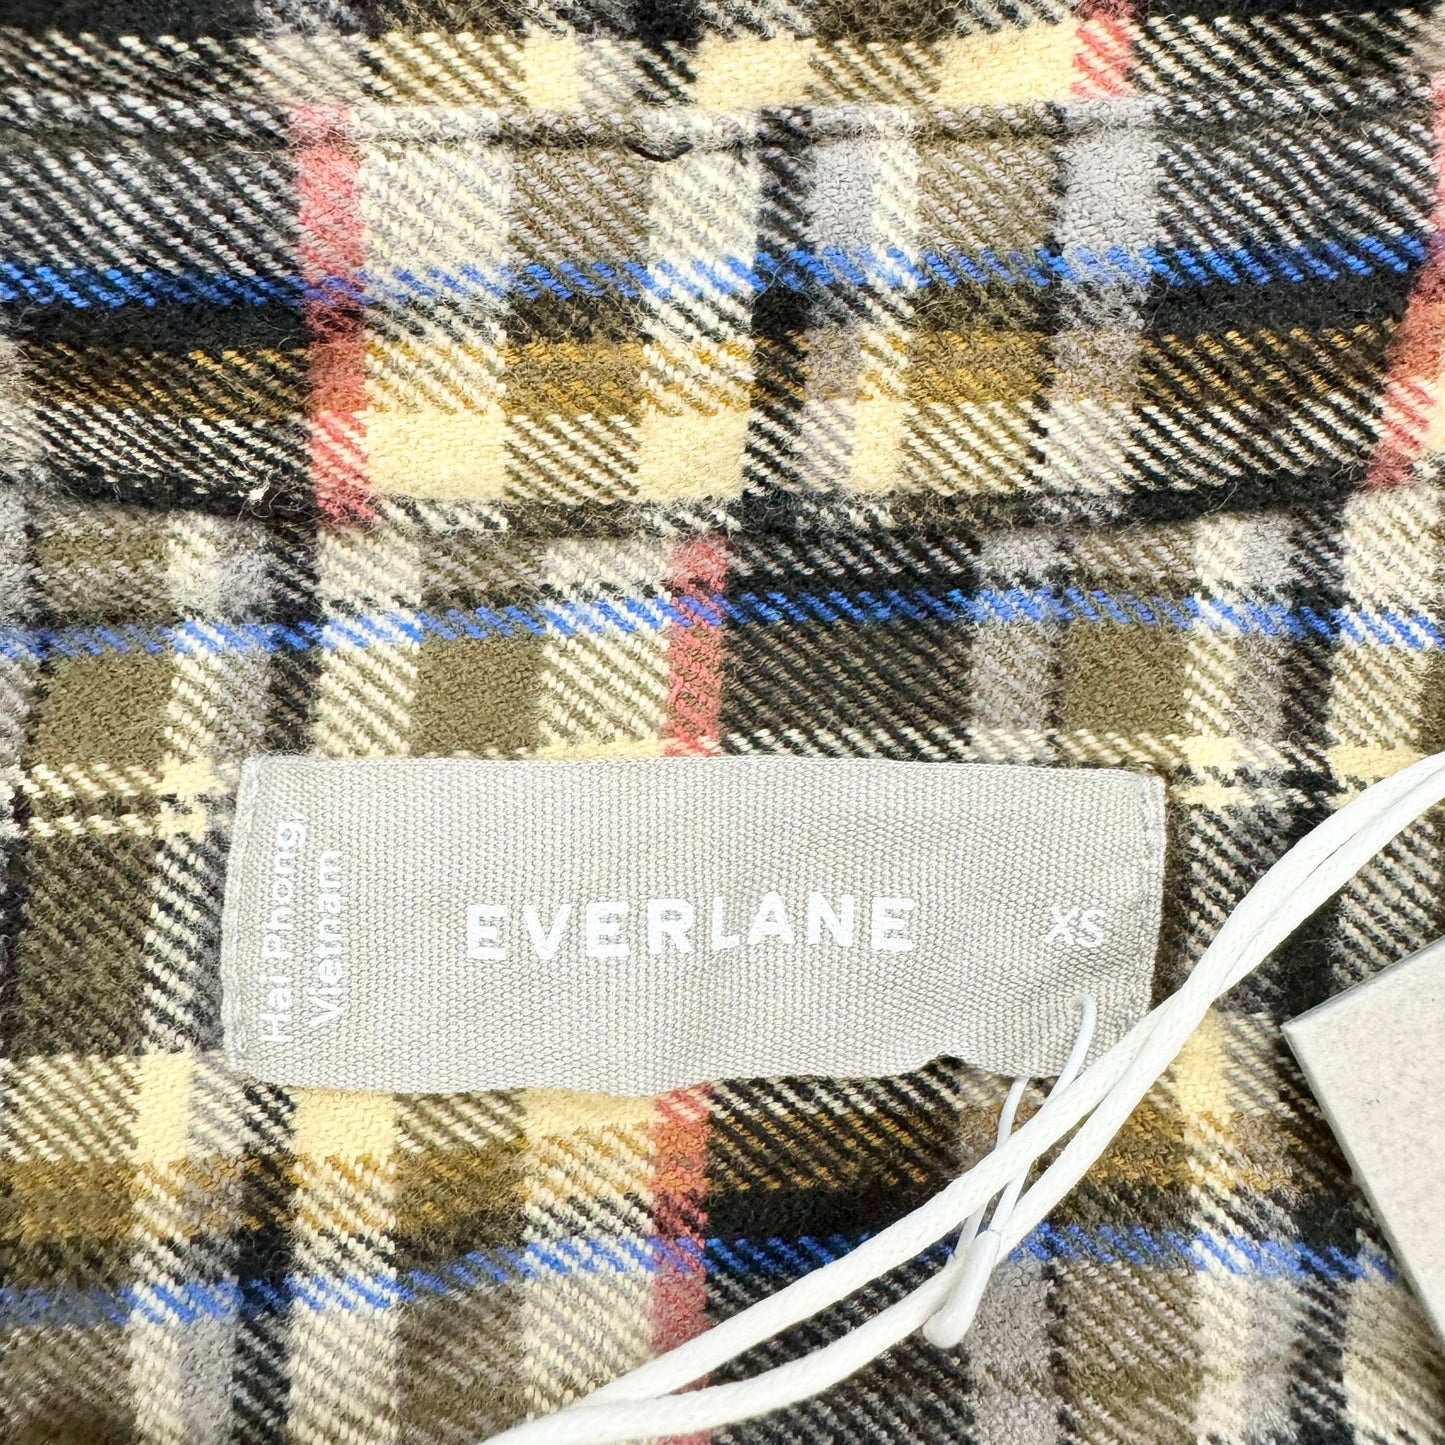 Top Long Sleeve By Everlane  Size: Xs